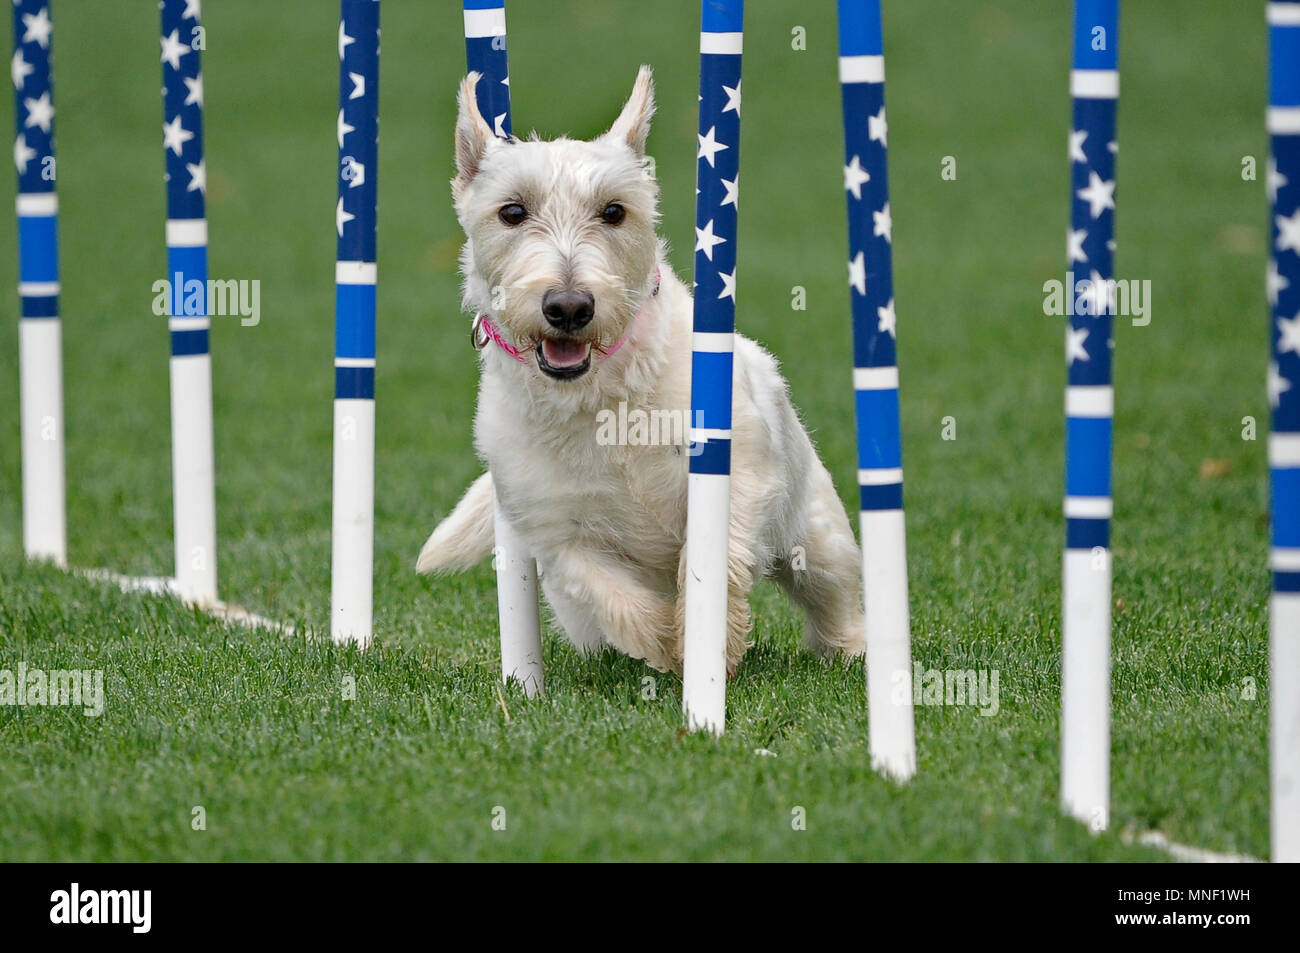 An All American dog weaving thru stars and stripes weave poles in an AKC agility trial. Stock Photo